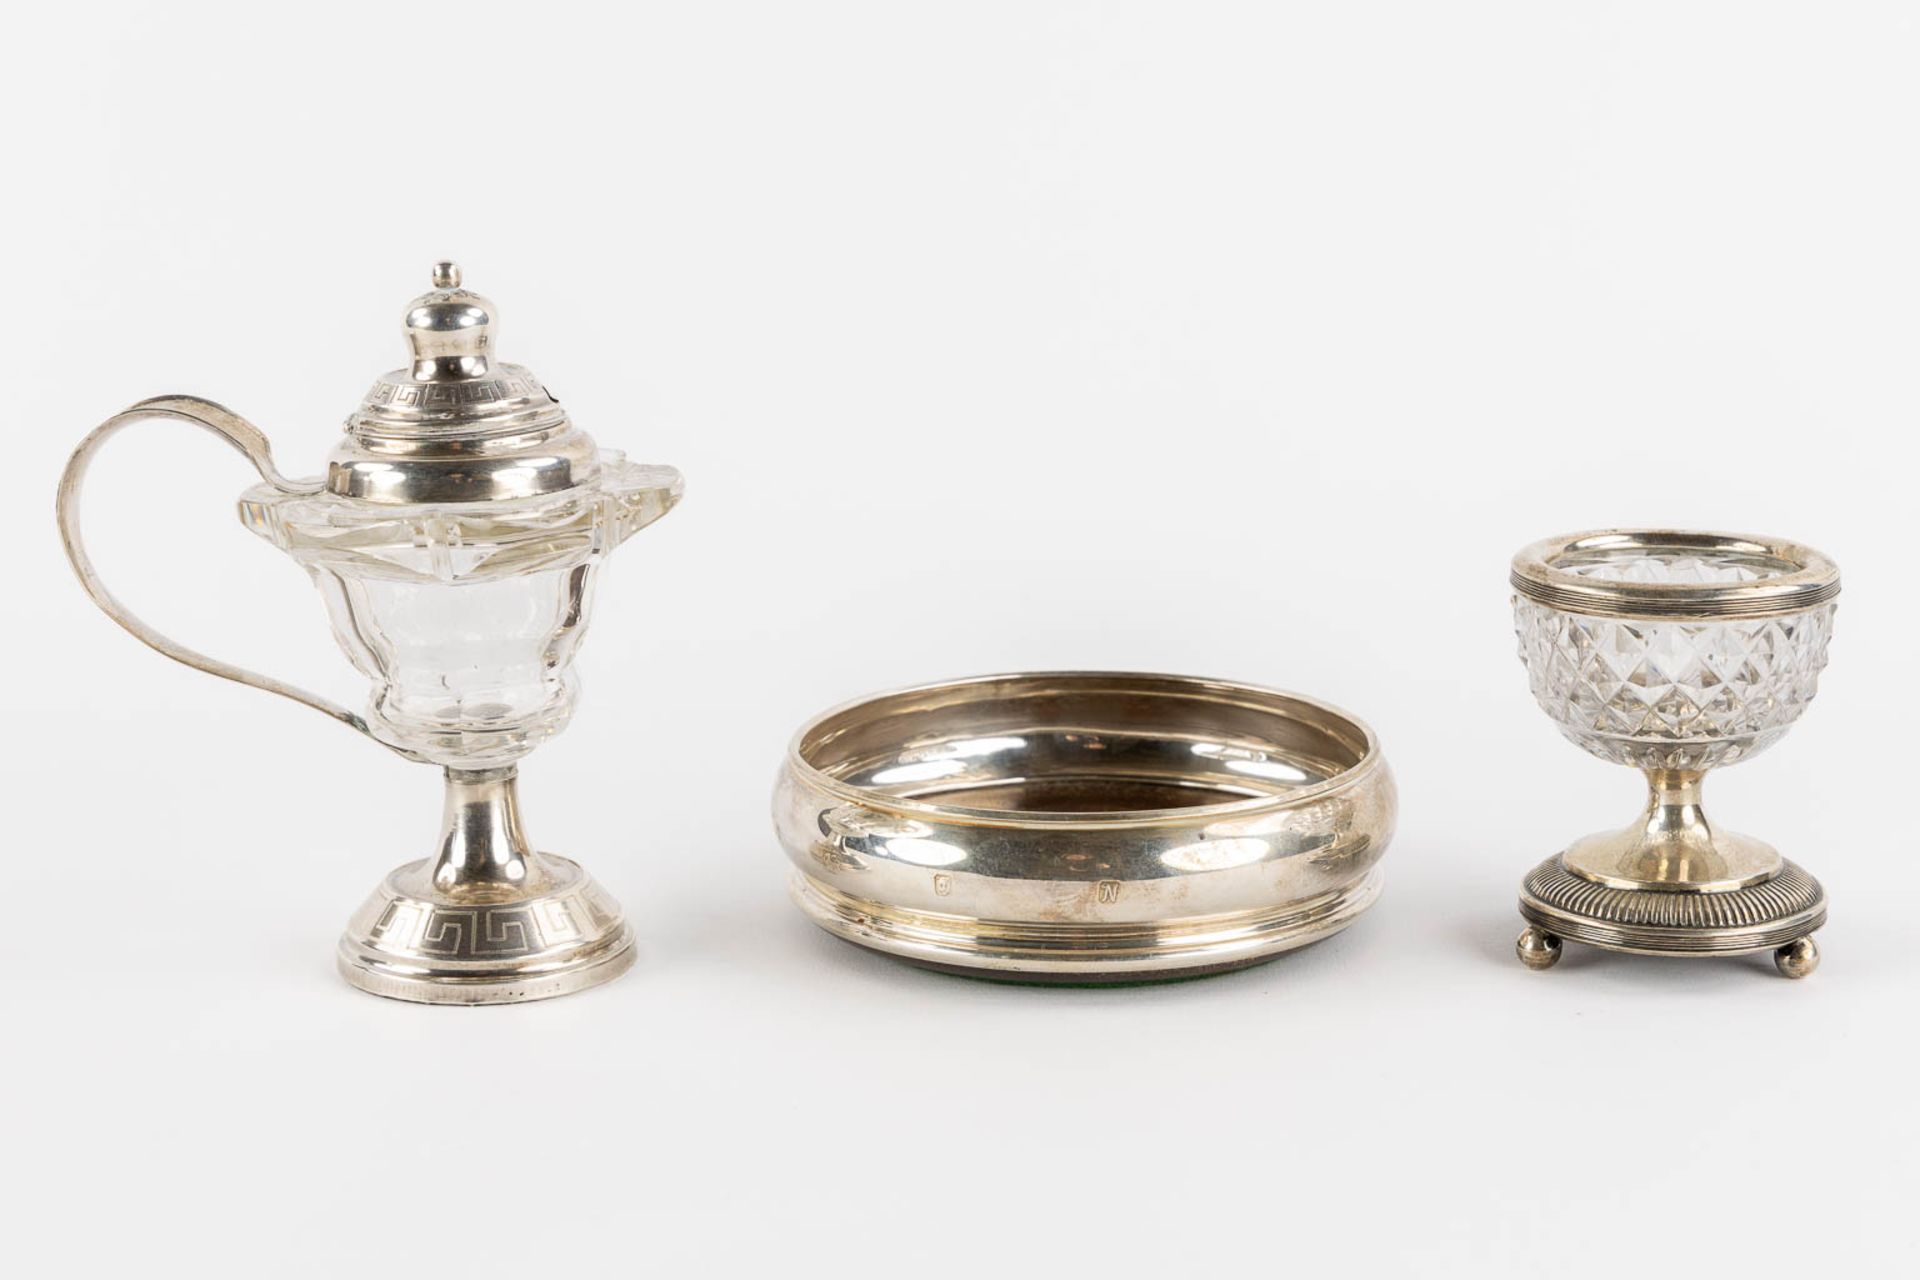 A large collection of silver and glass items, picture frames, serving ware and table accessories. 19 - Image 16 of 19